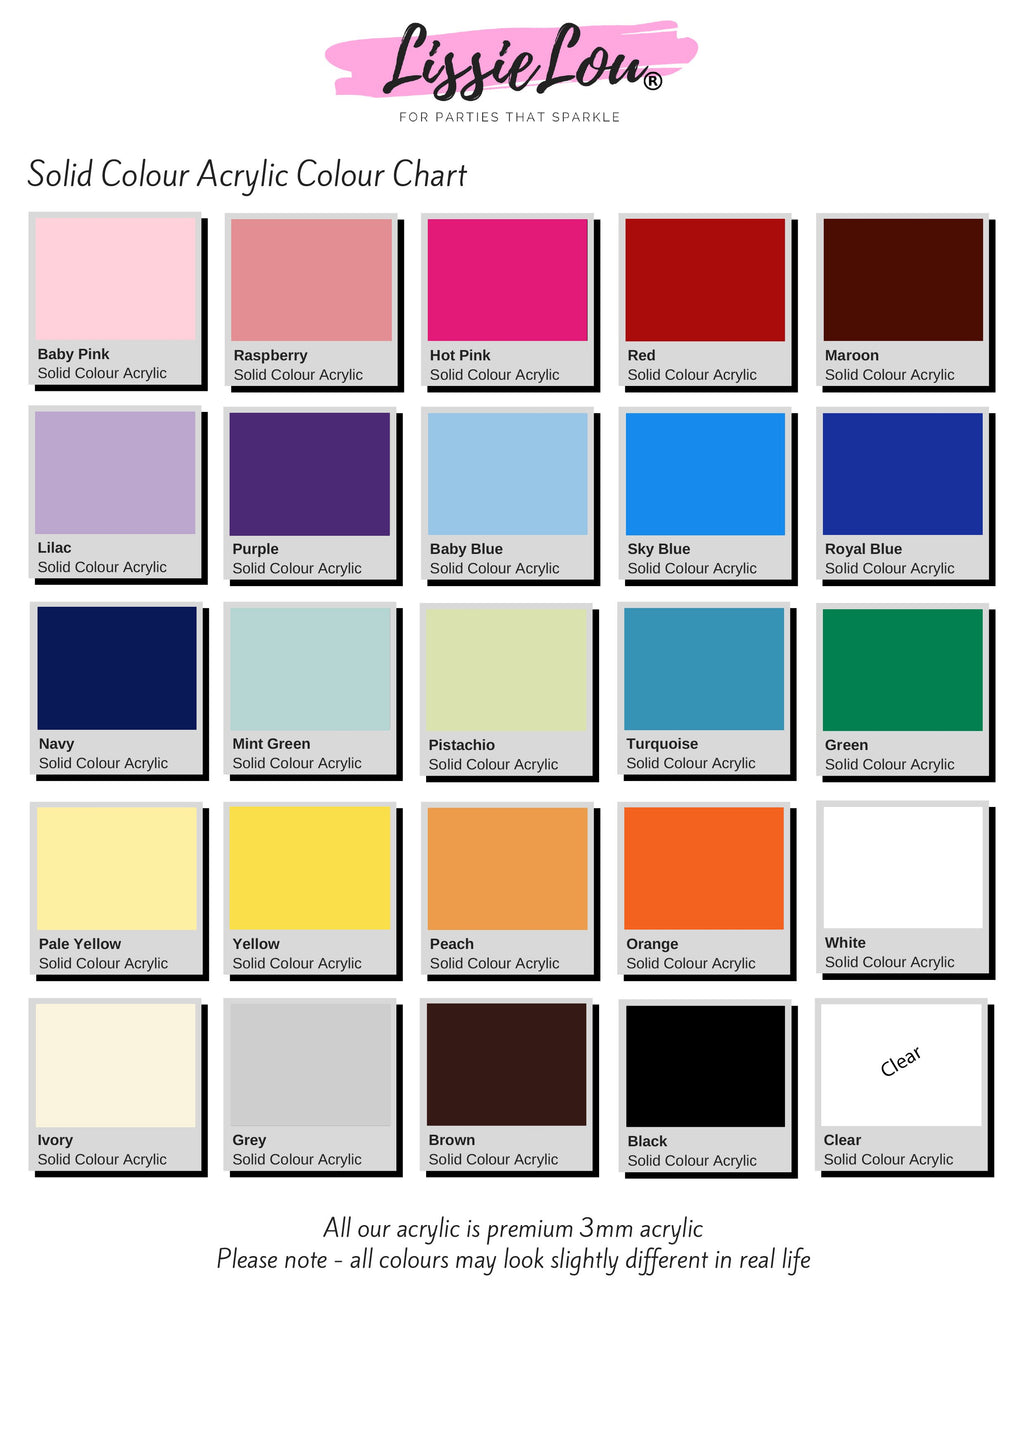 Acrylic Solid Colour Chart